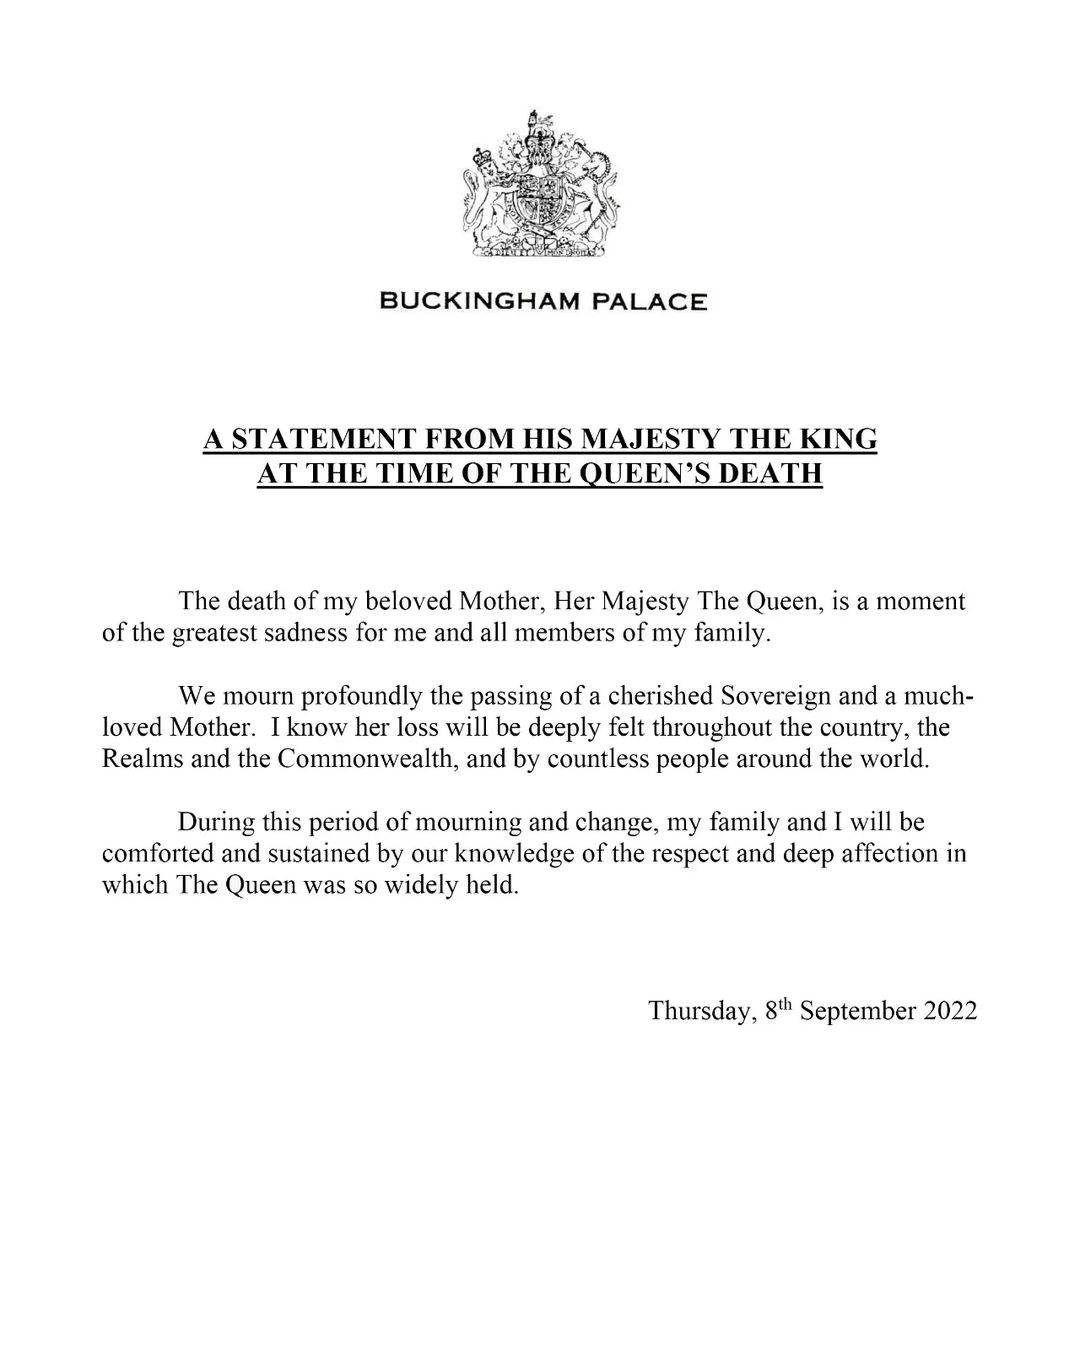 Official statement by His Majesty King Charles at the time of the Queen’s death